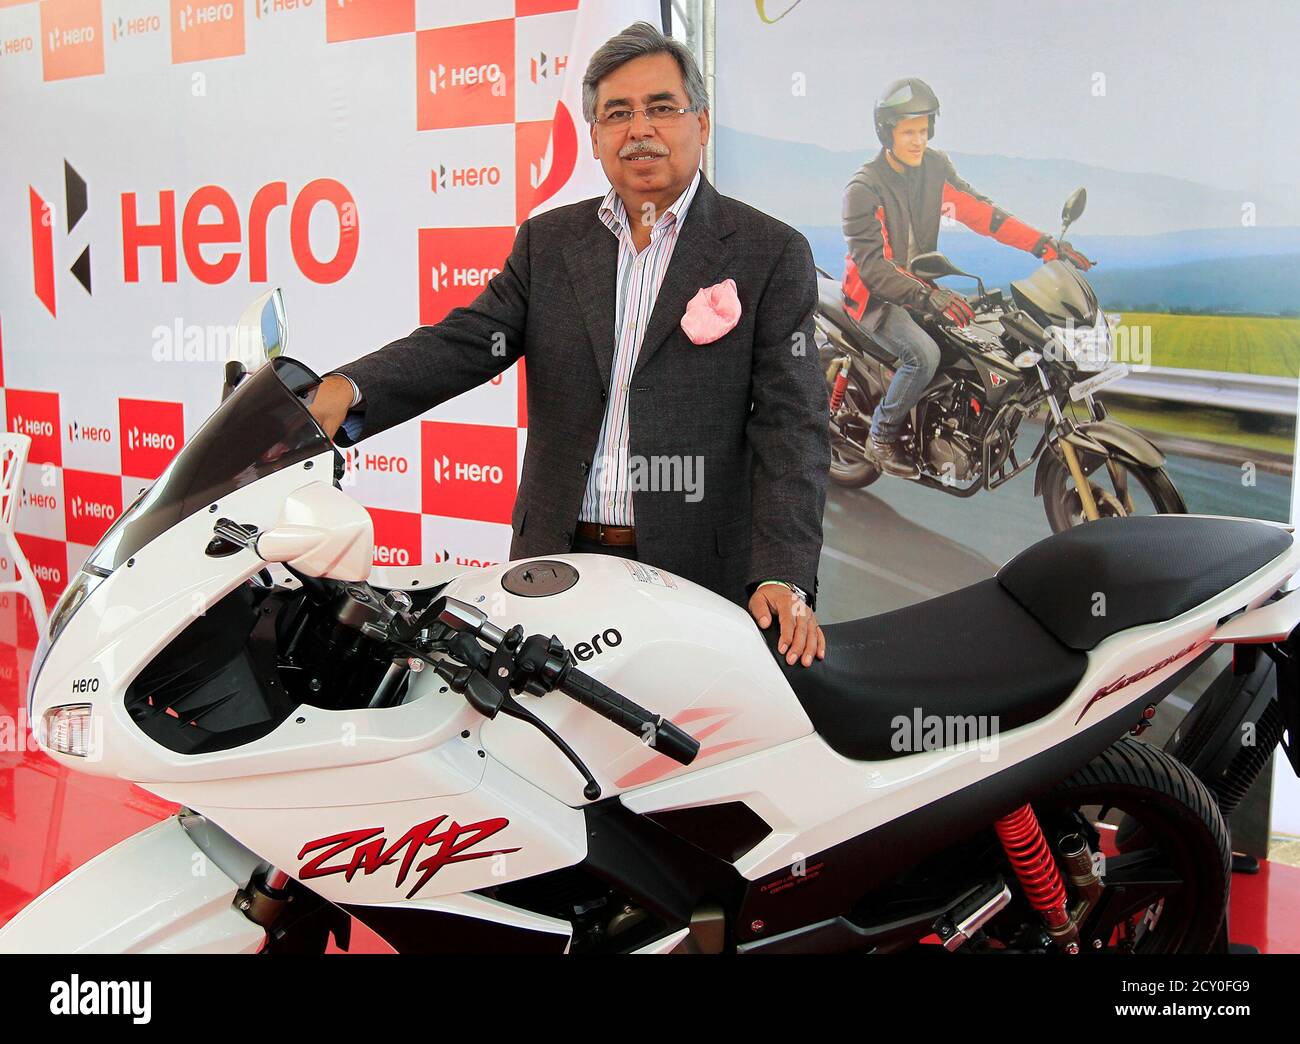 Pawan Munjal Managing Director And Ceo Of Hero Motocorp India S Largest Maker Of Motorcycles And Scooters Poses For A Photo During A News Conference In Villa Rica Cauca July 6 14 Munjal